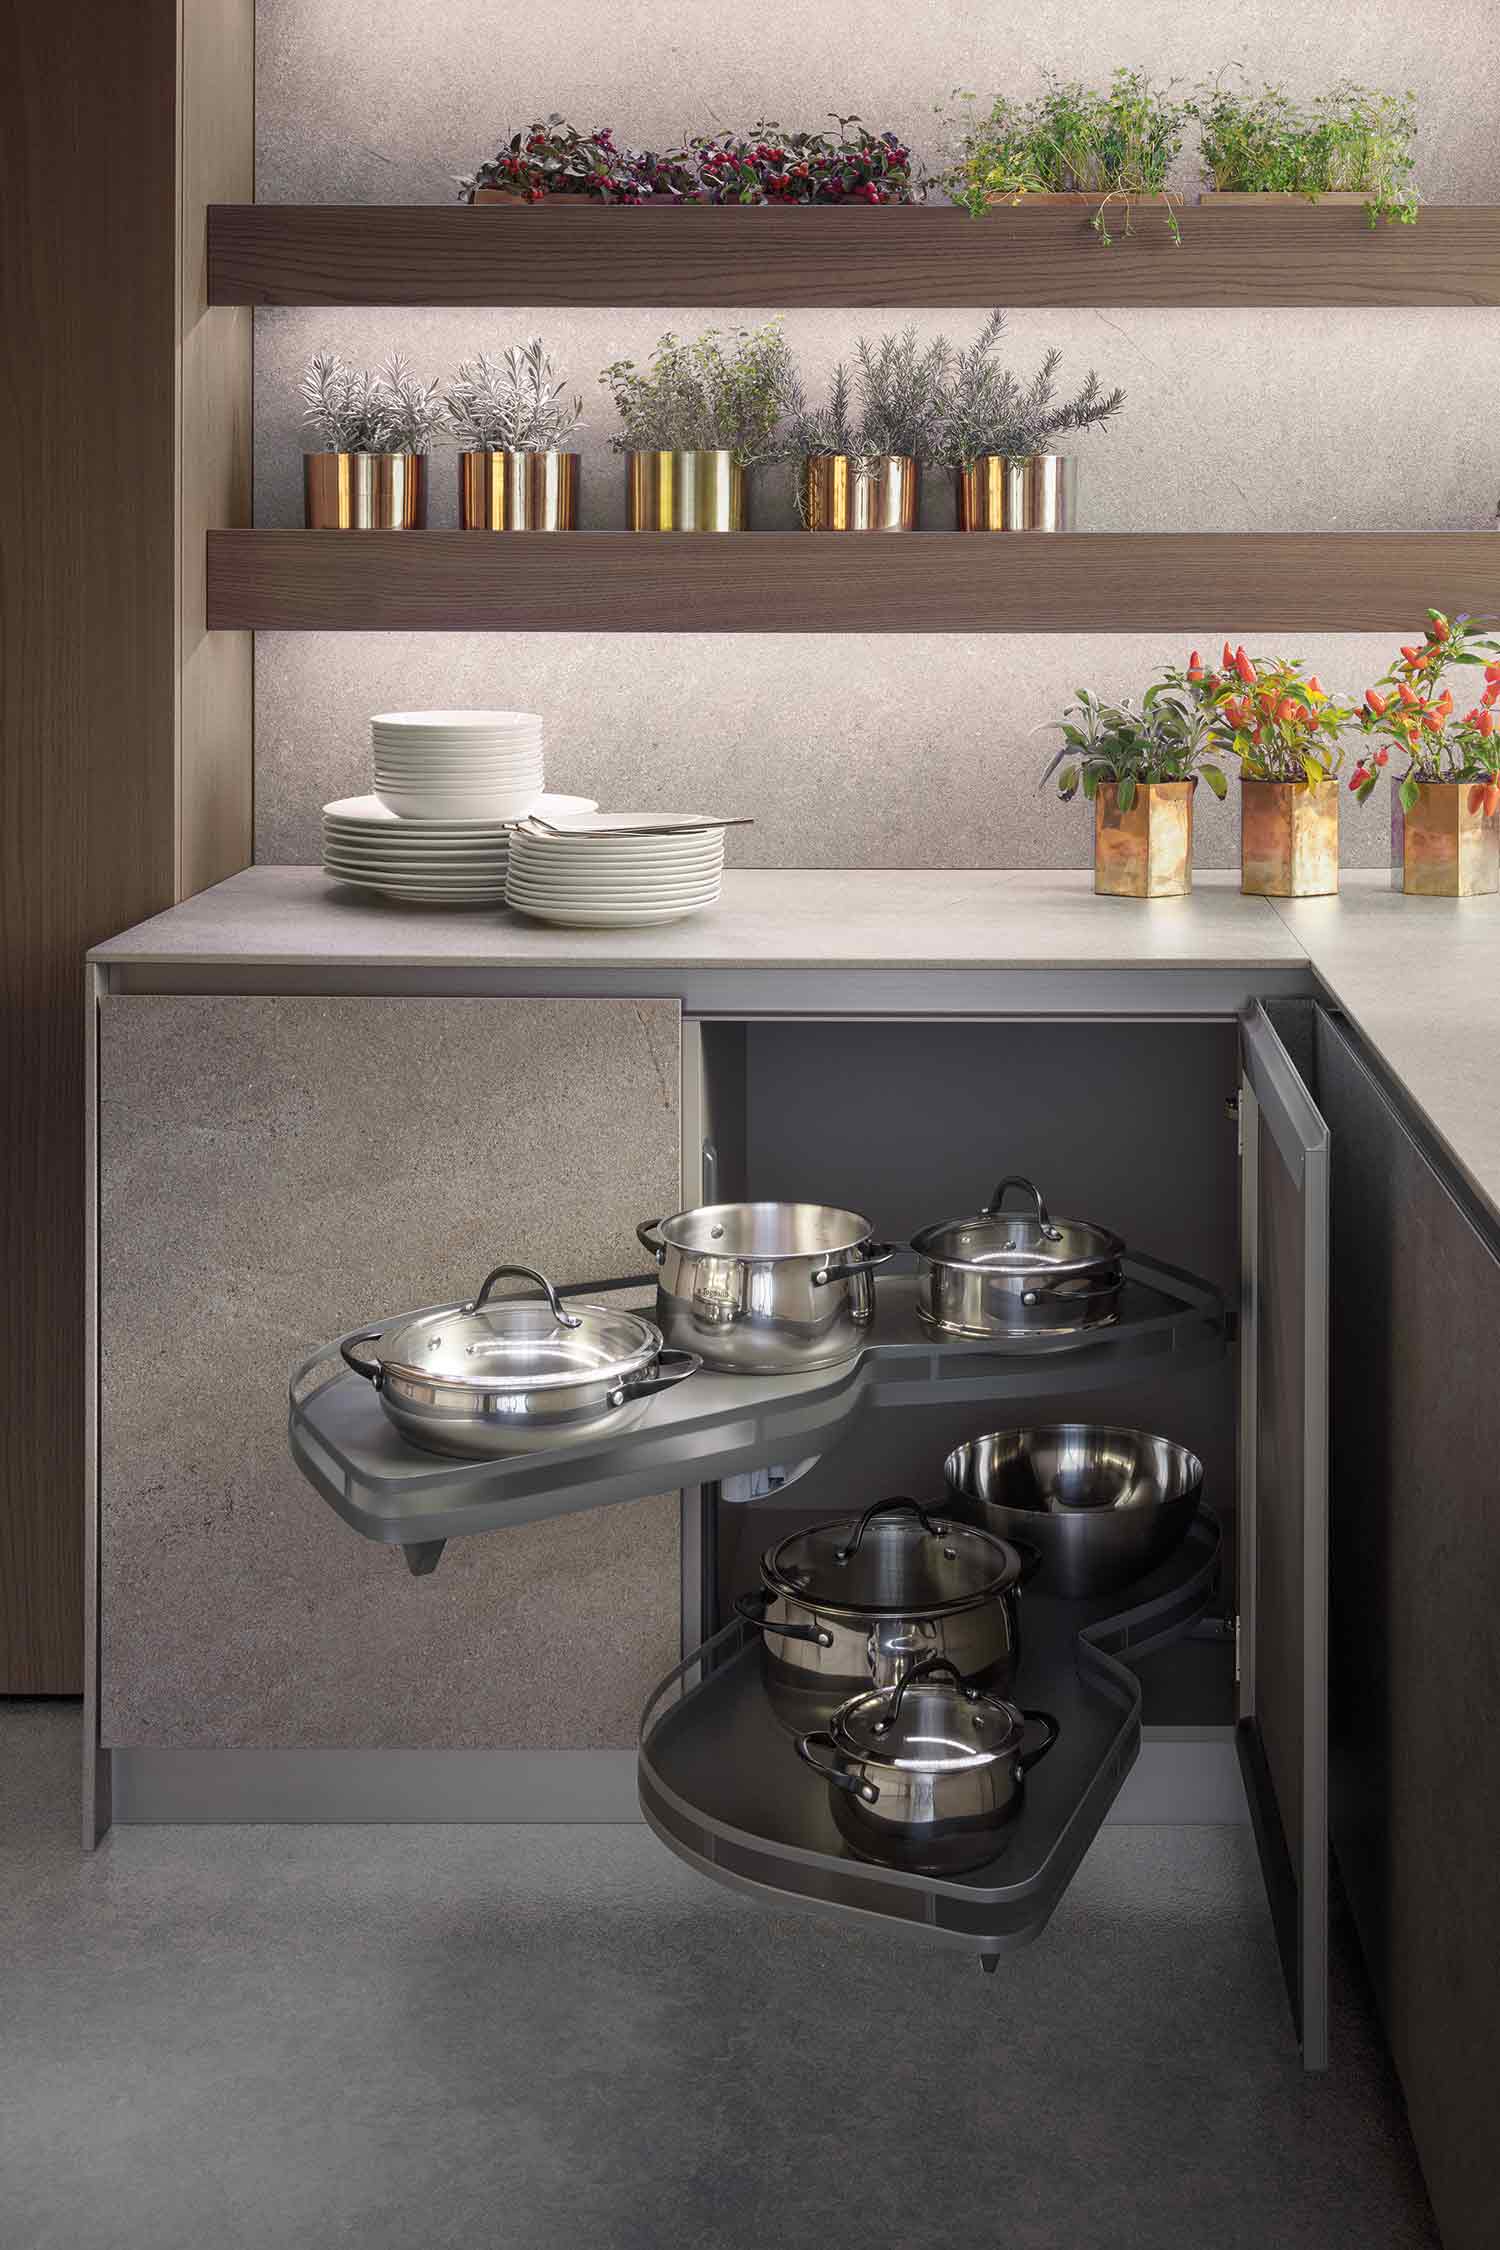 Le Mans mechanism extraction trays utilises all the available kitchen space.